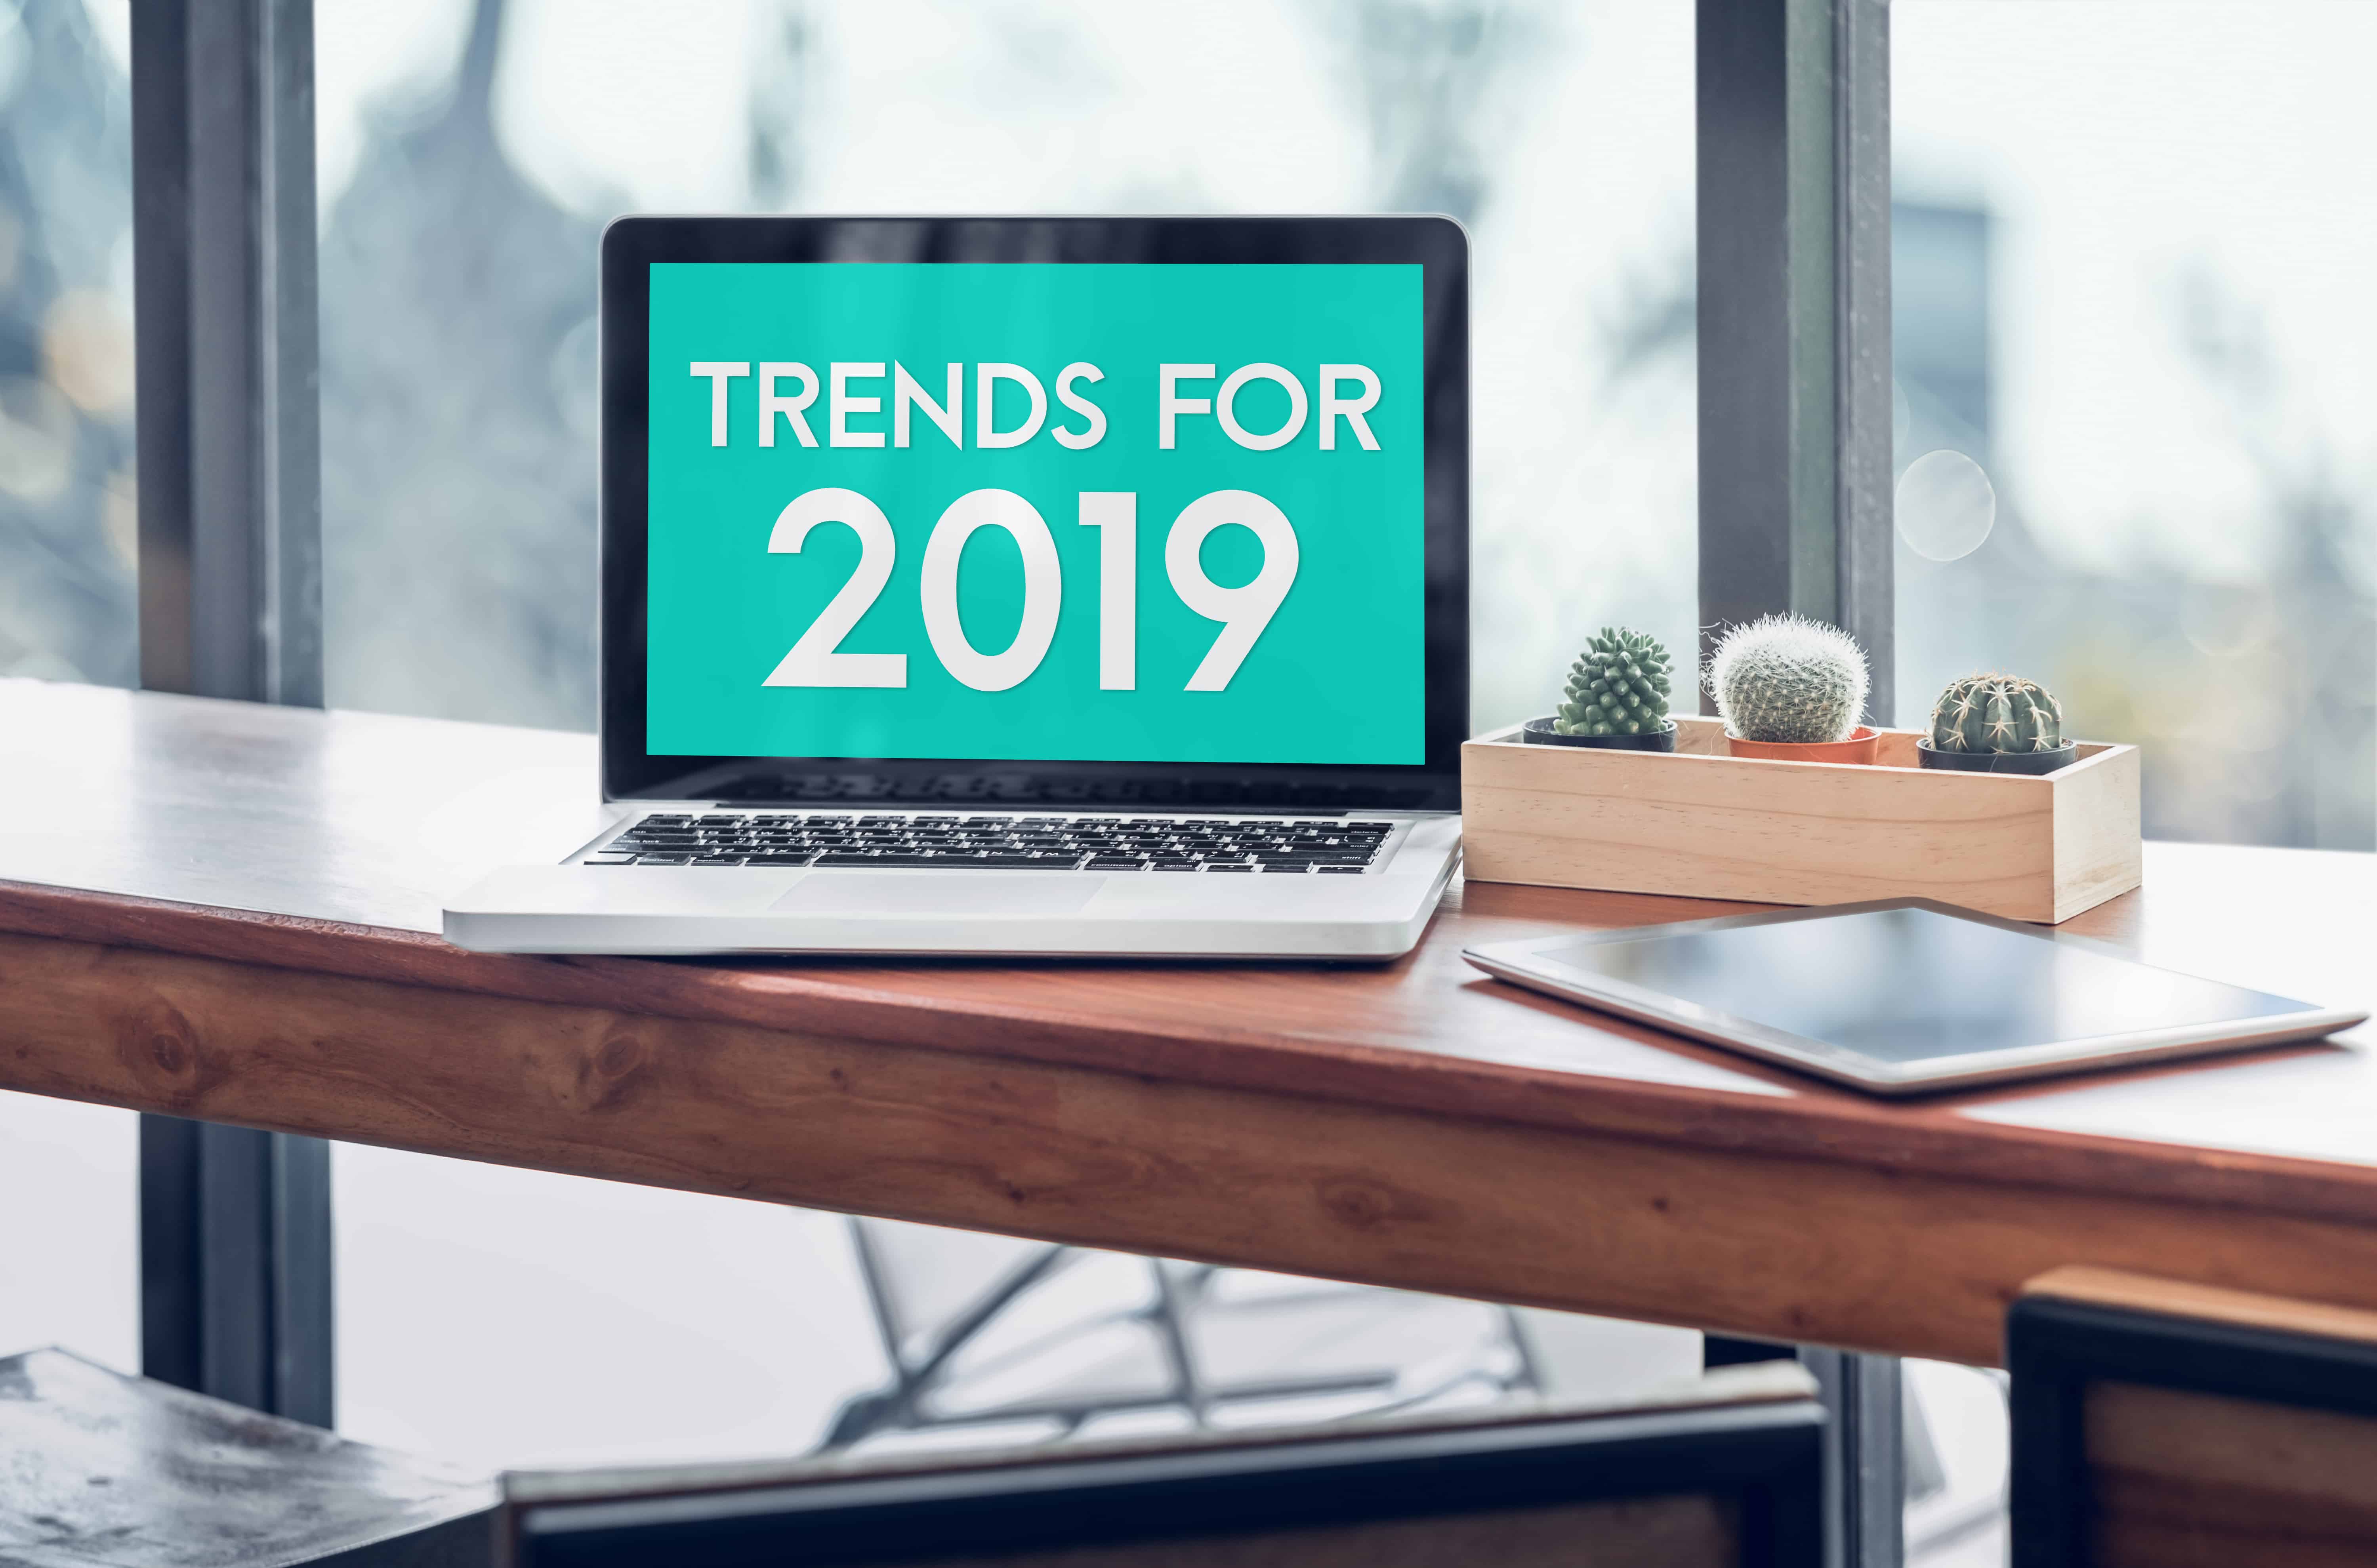 Video Marketing News: What's Trending in 2019?